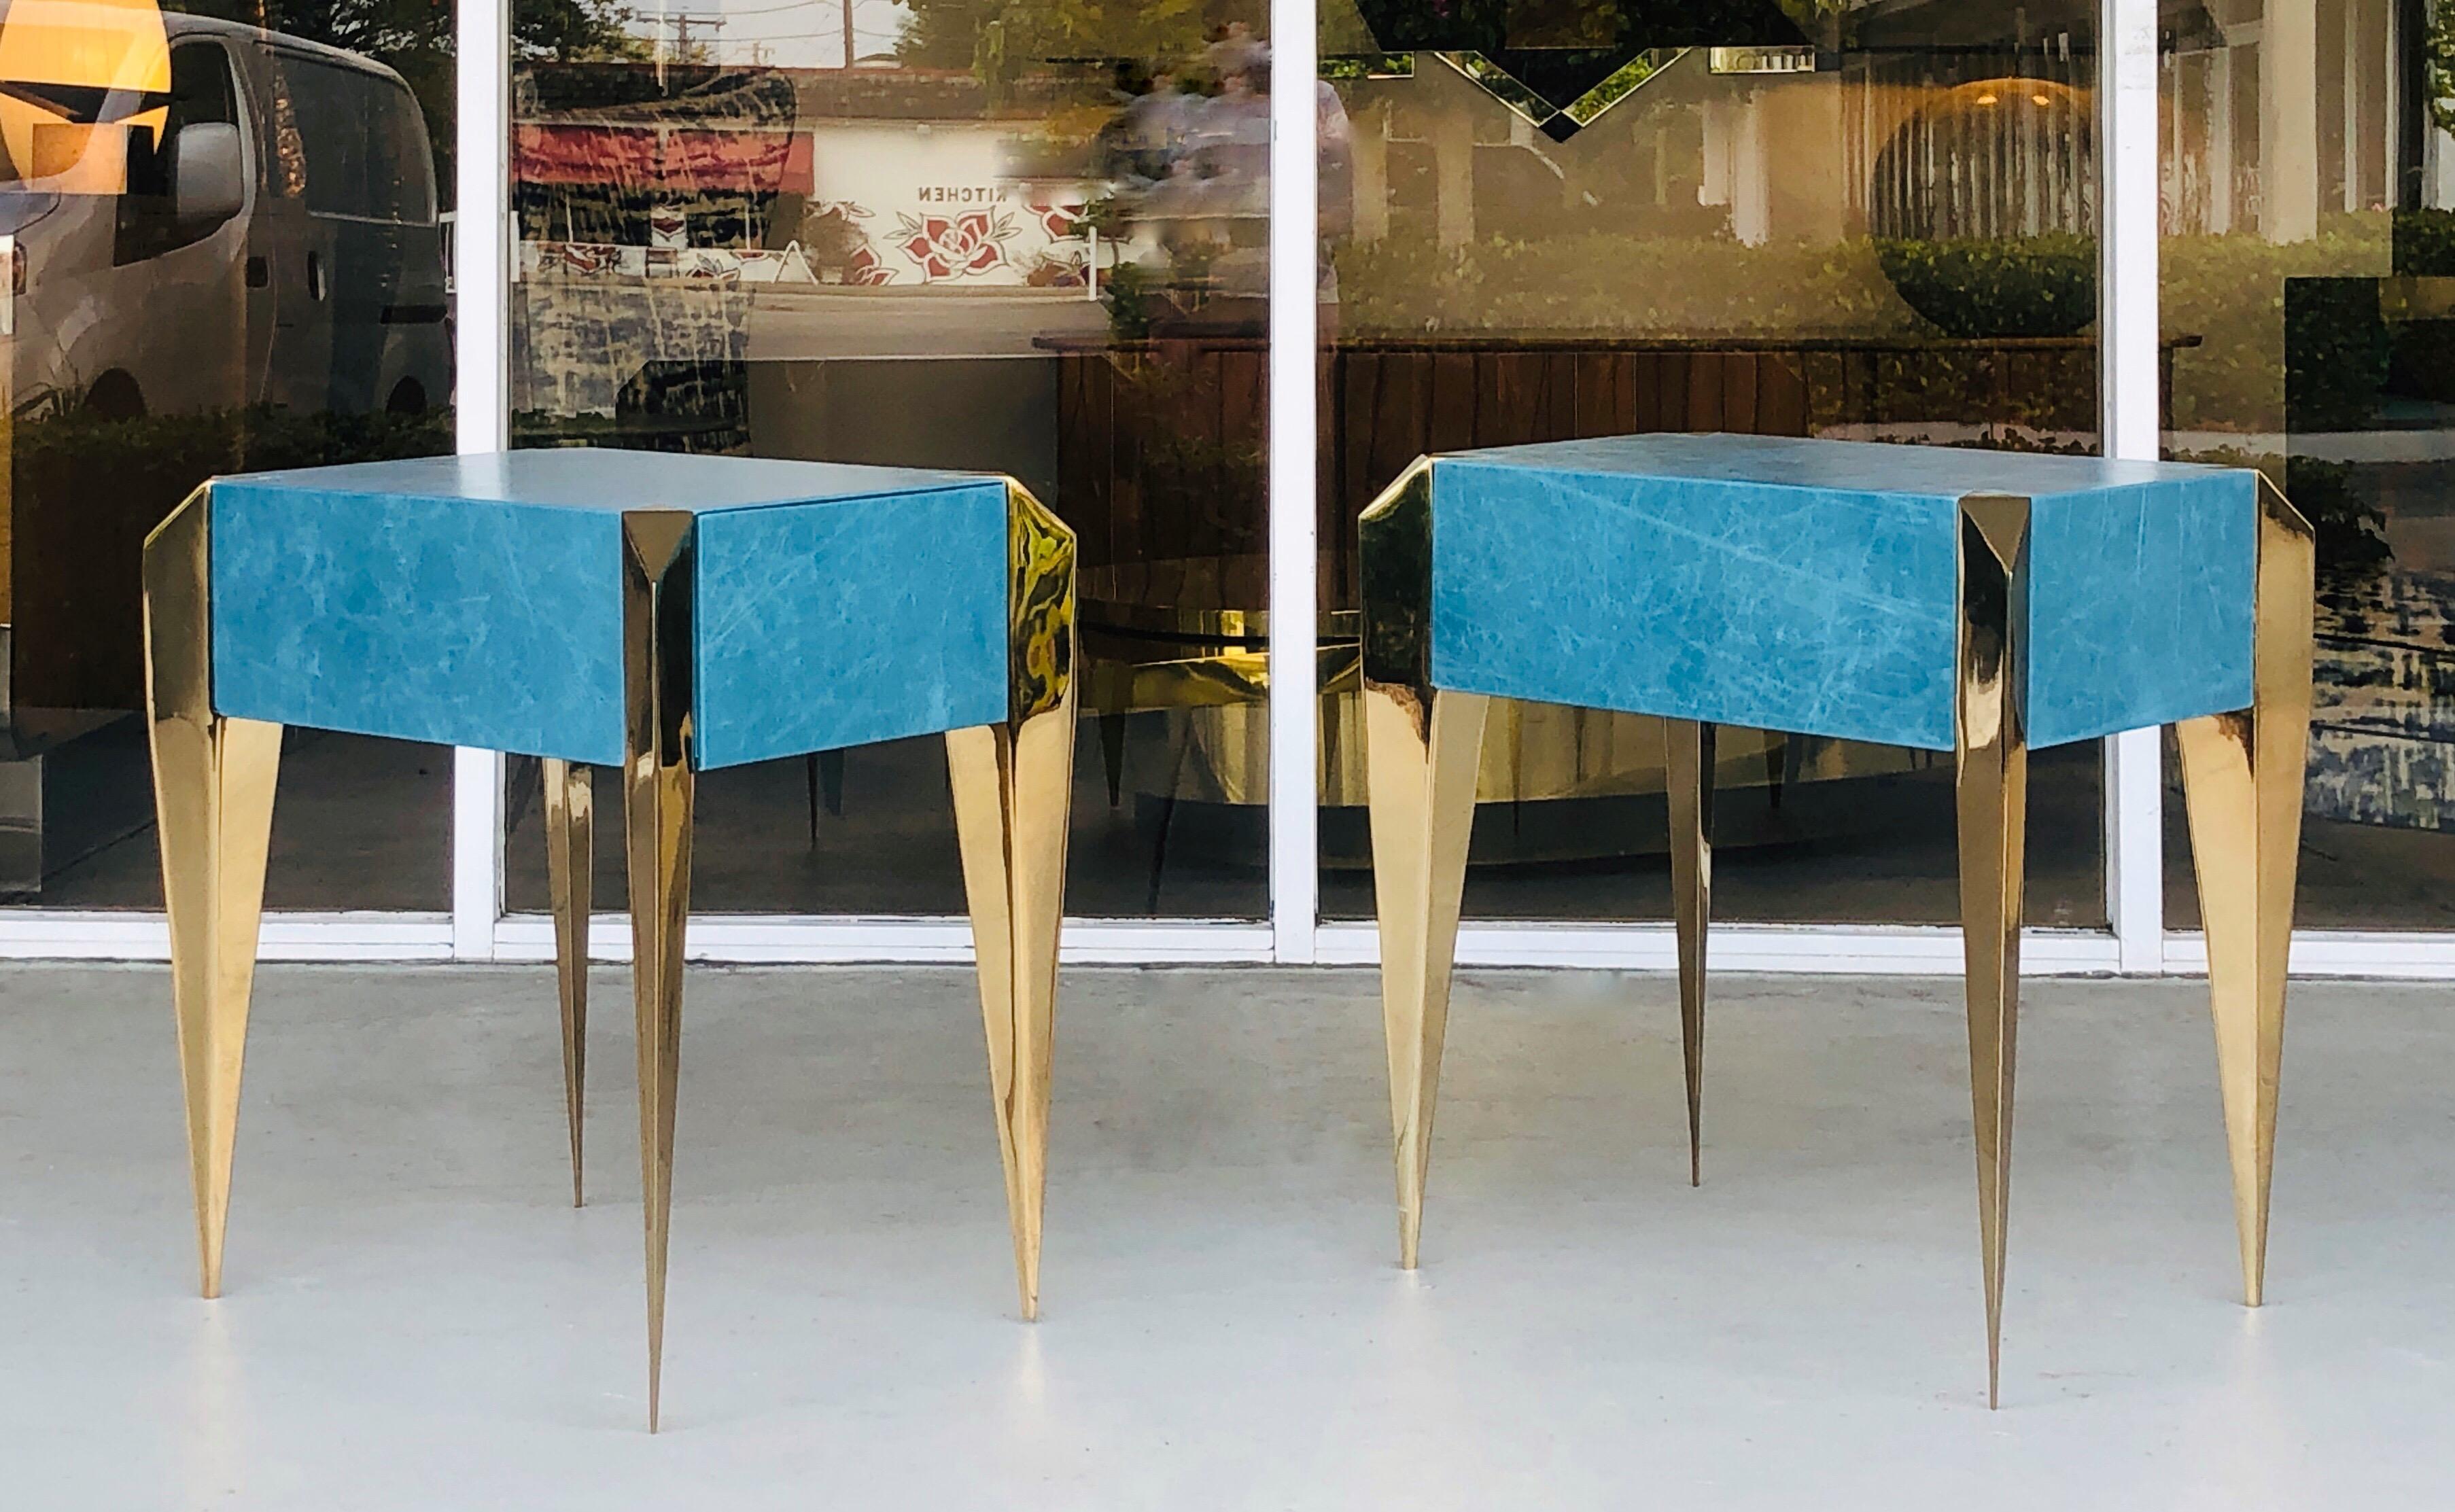 A pair of modern sculptural side tables. The body is clad in cerulean blue leather, the prism like legs are gold plated metal. One-drawer each.